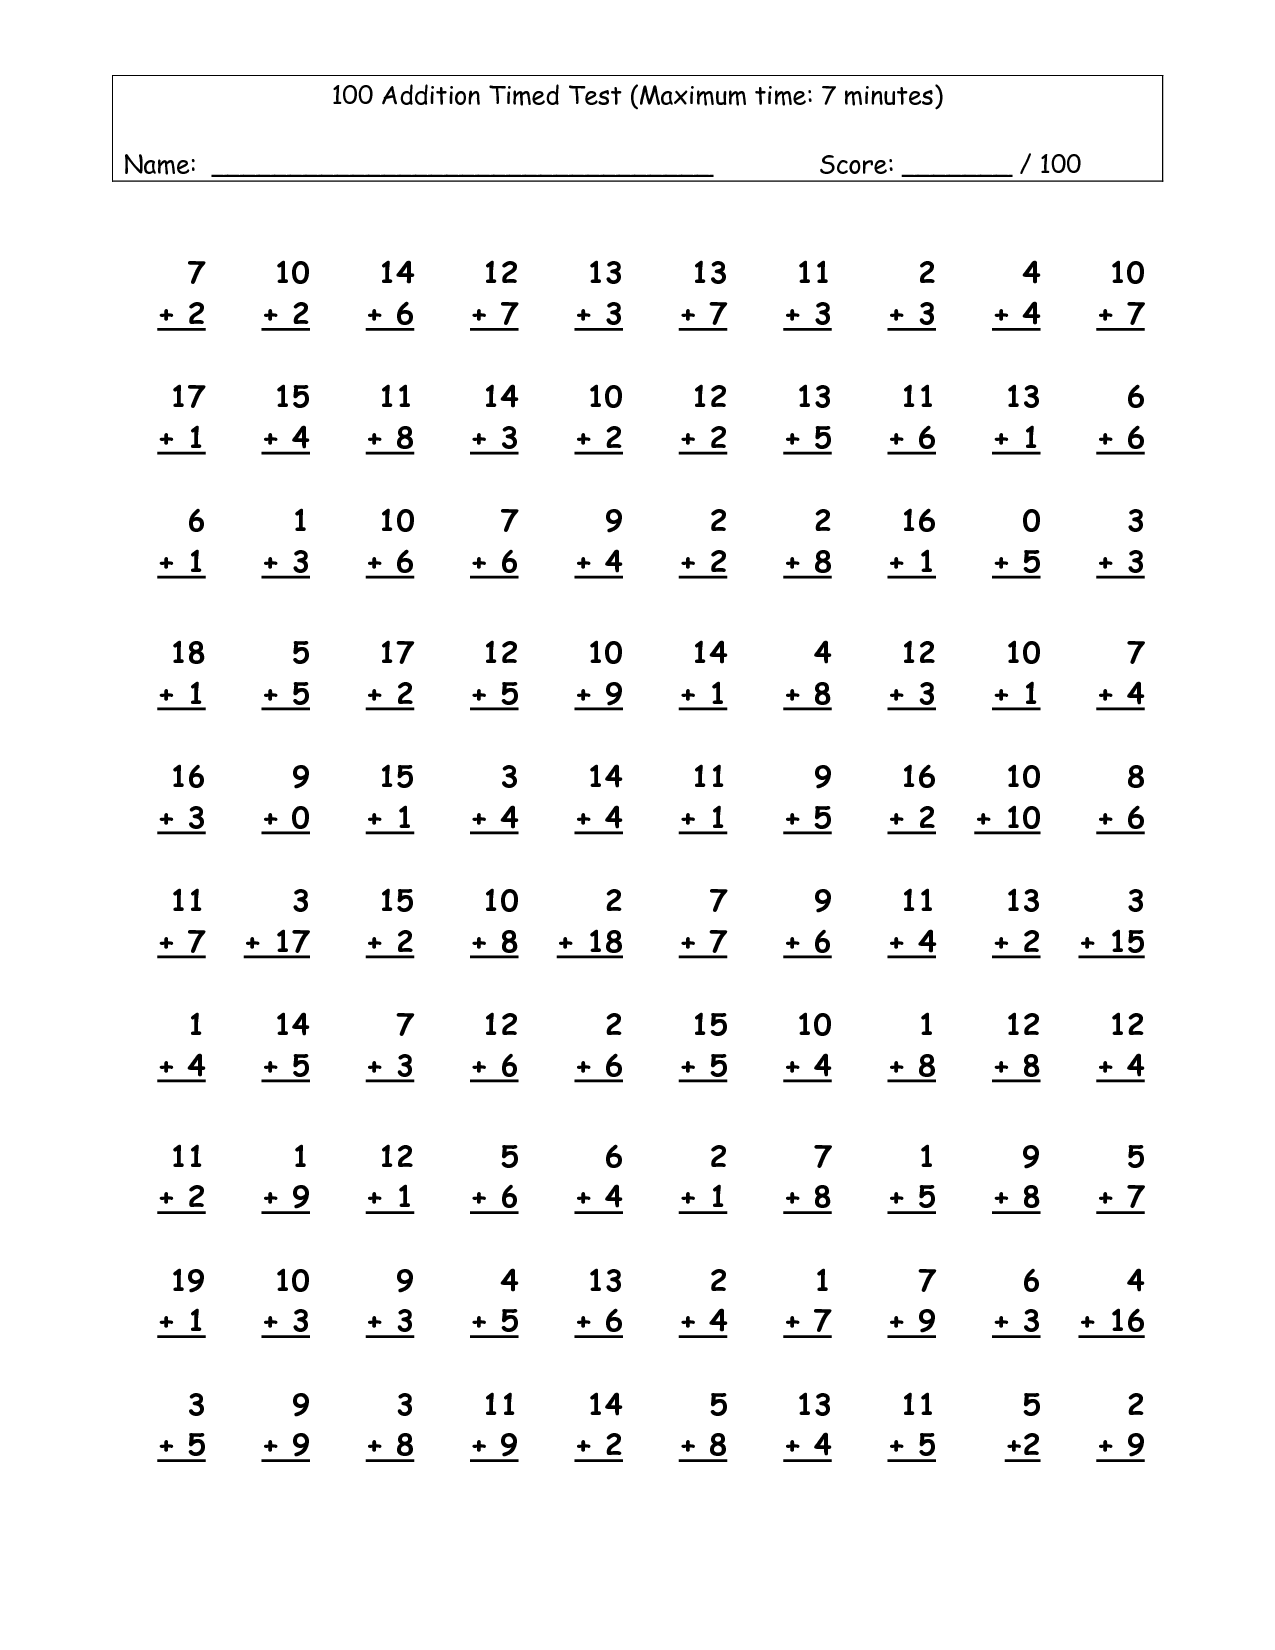 7-best-images-of-printable-addition-timed-tests-math-addition-timed